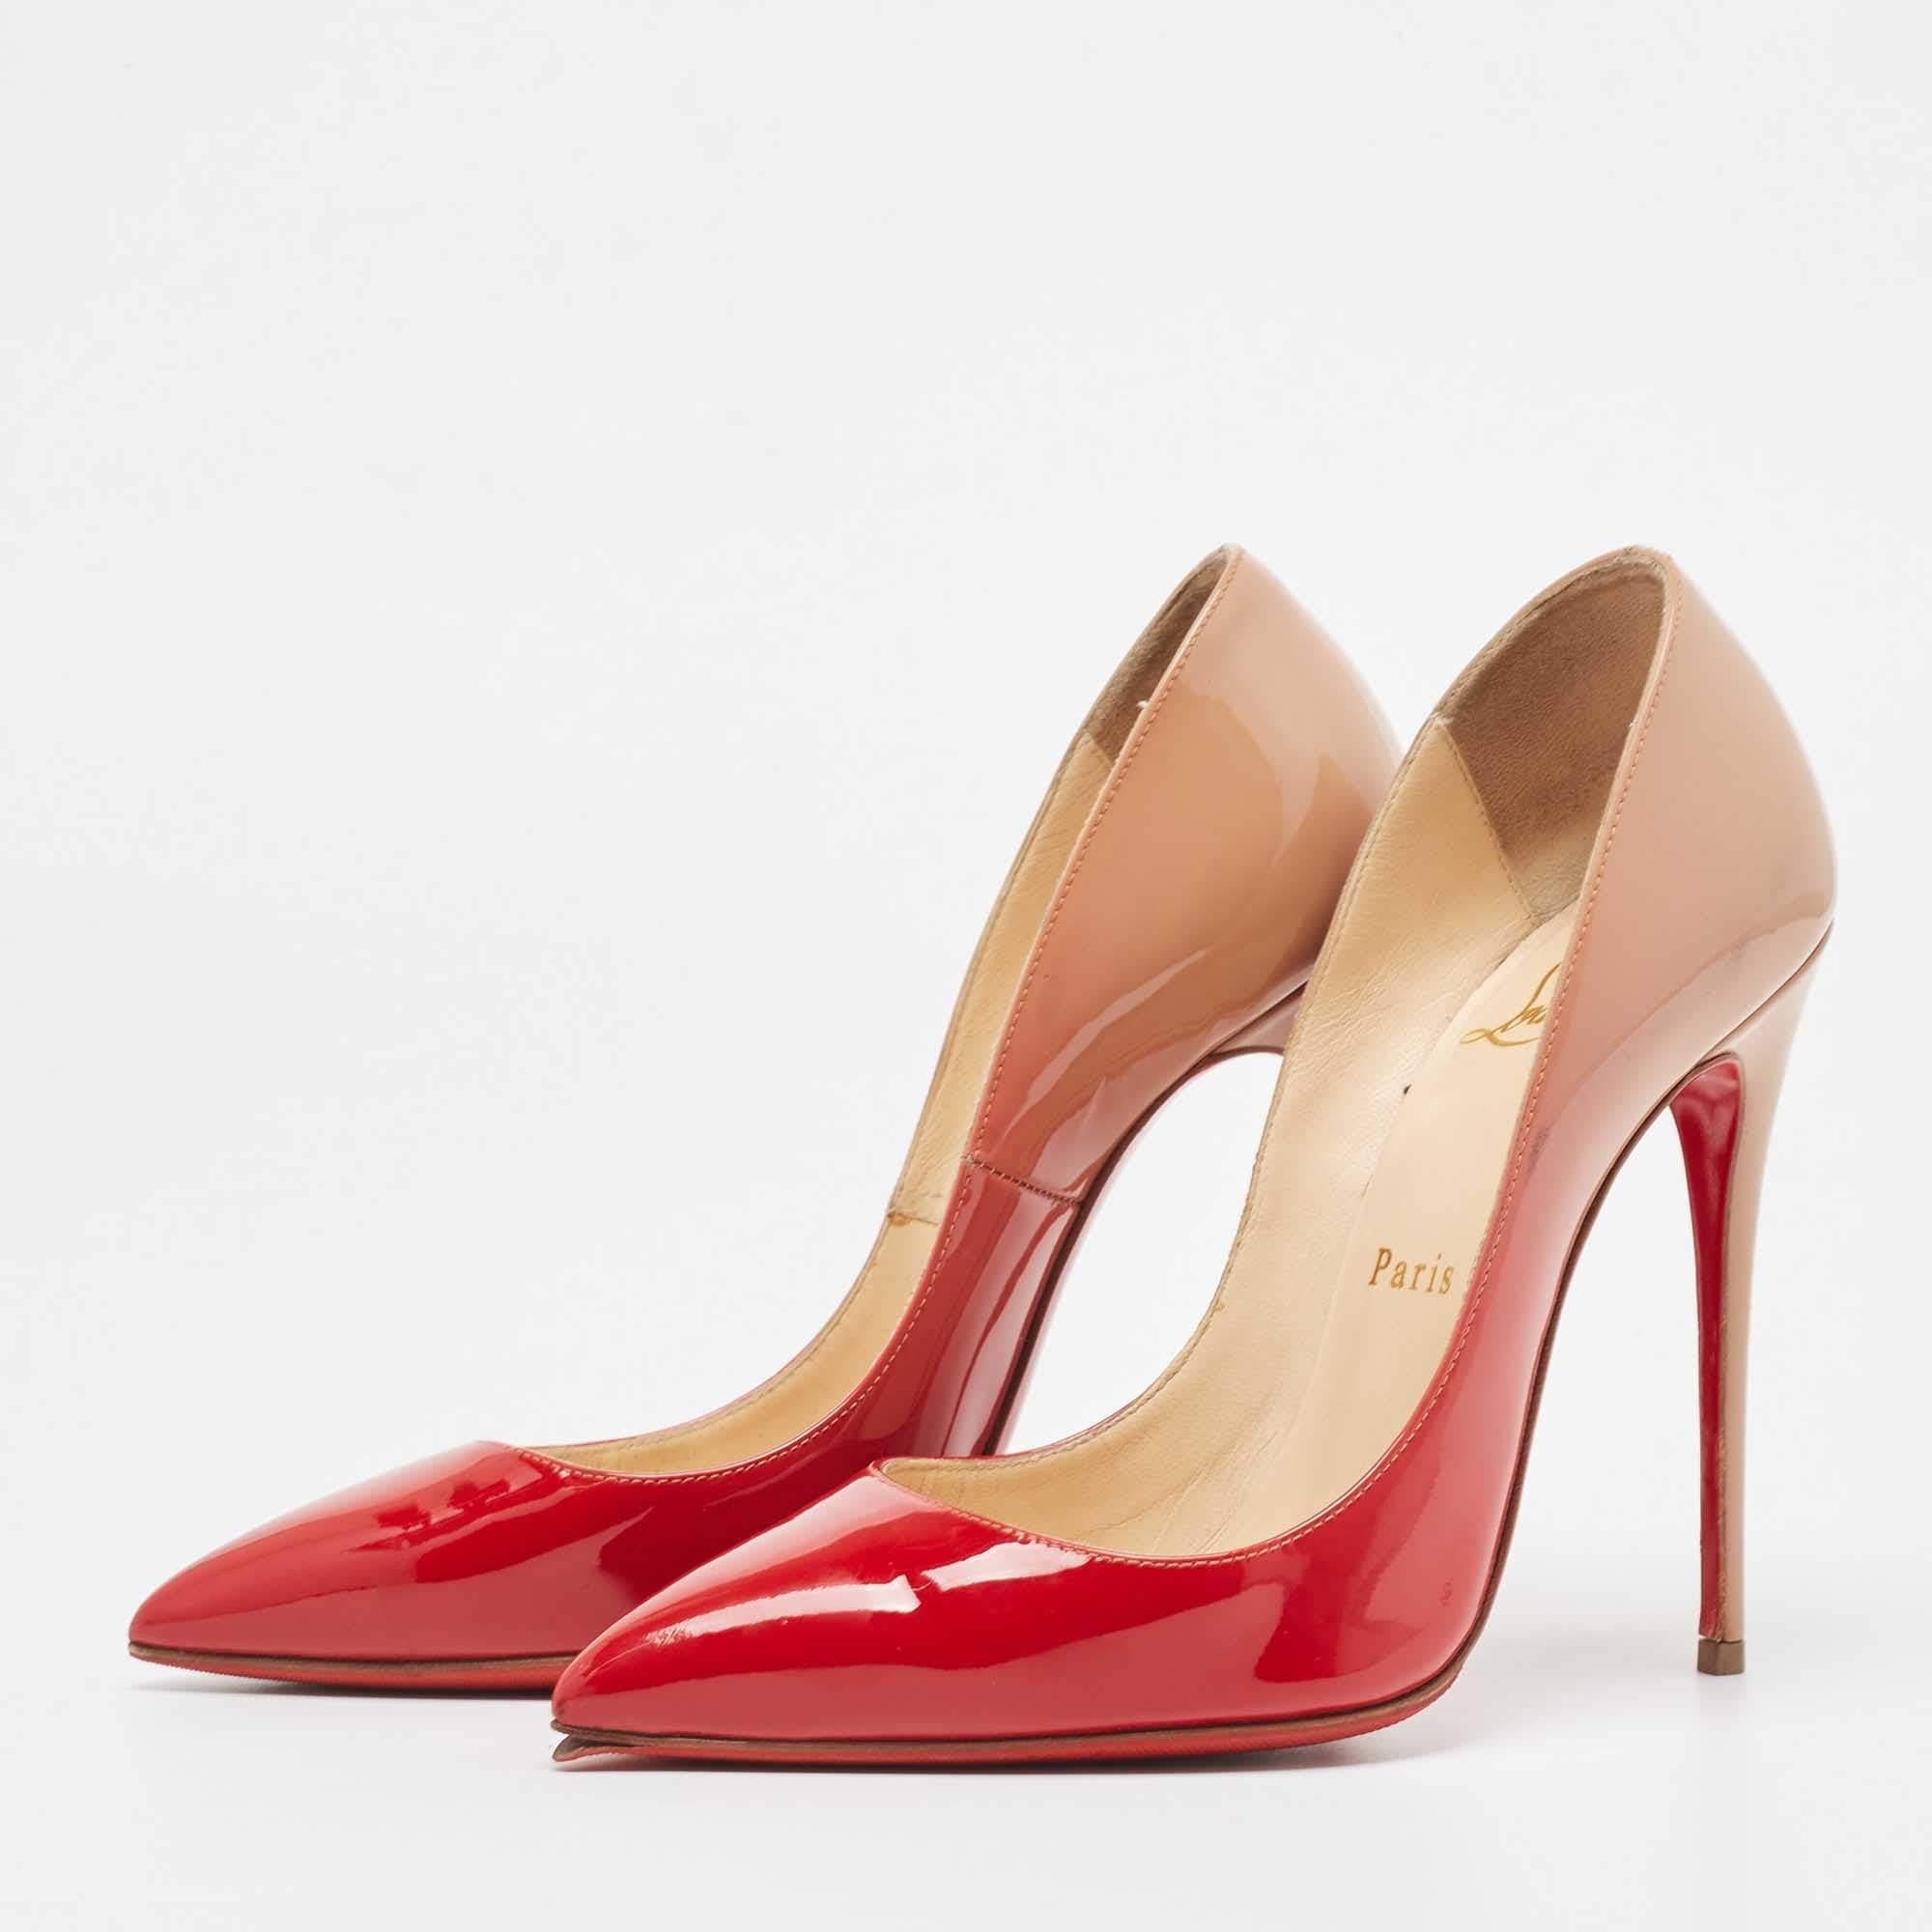 Christian Louboutin Red/Beige Ombre Patent Leather So Kate Pumps Size 36 2